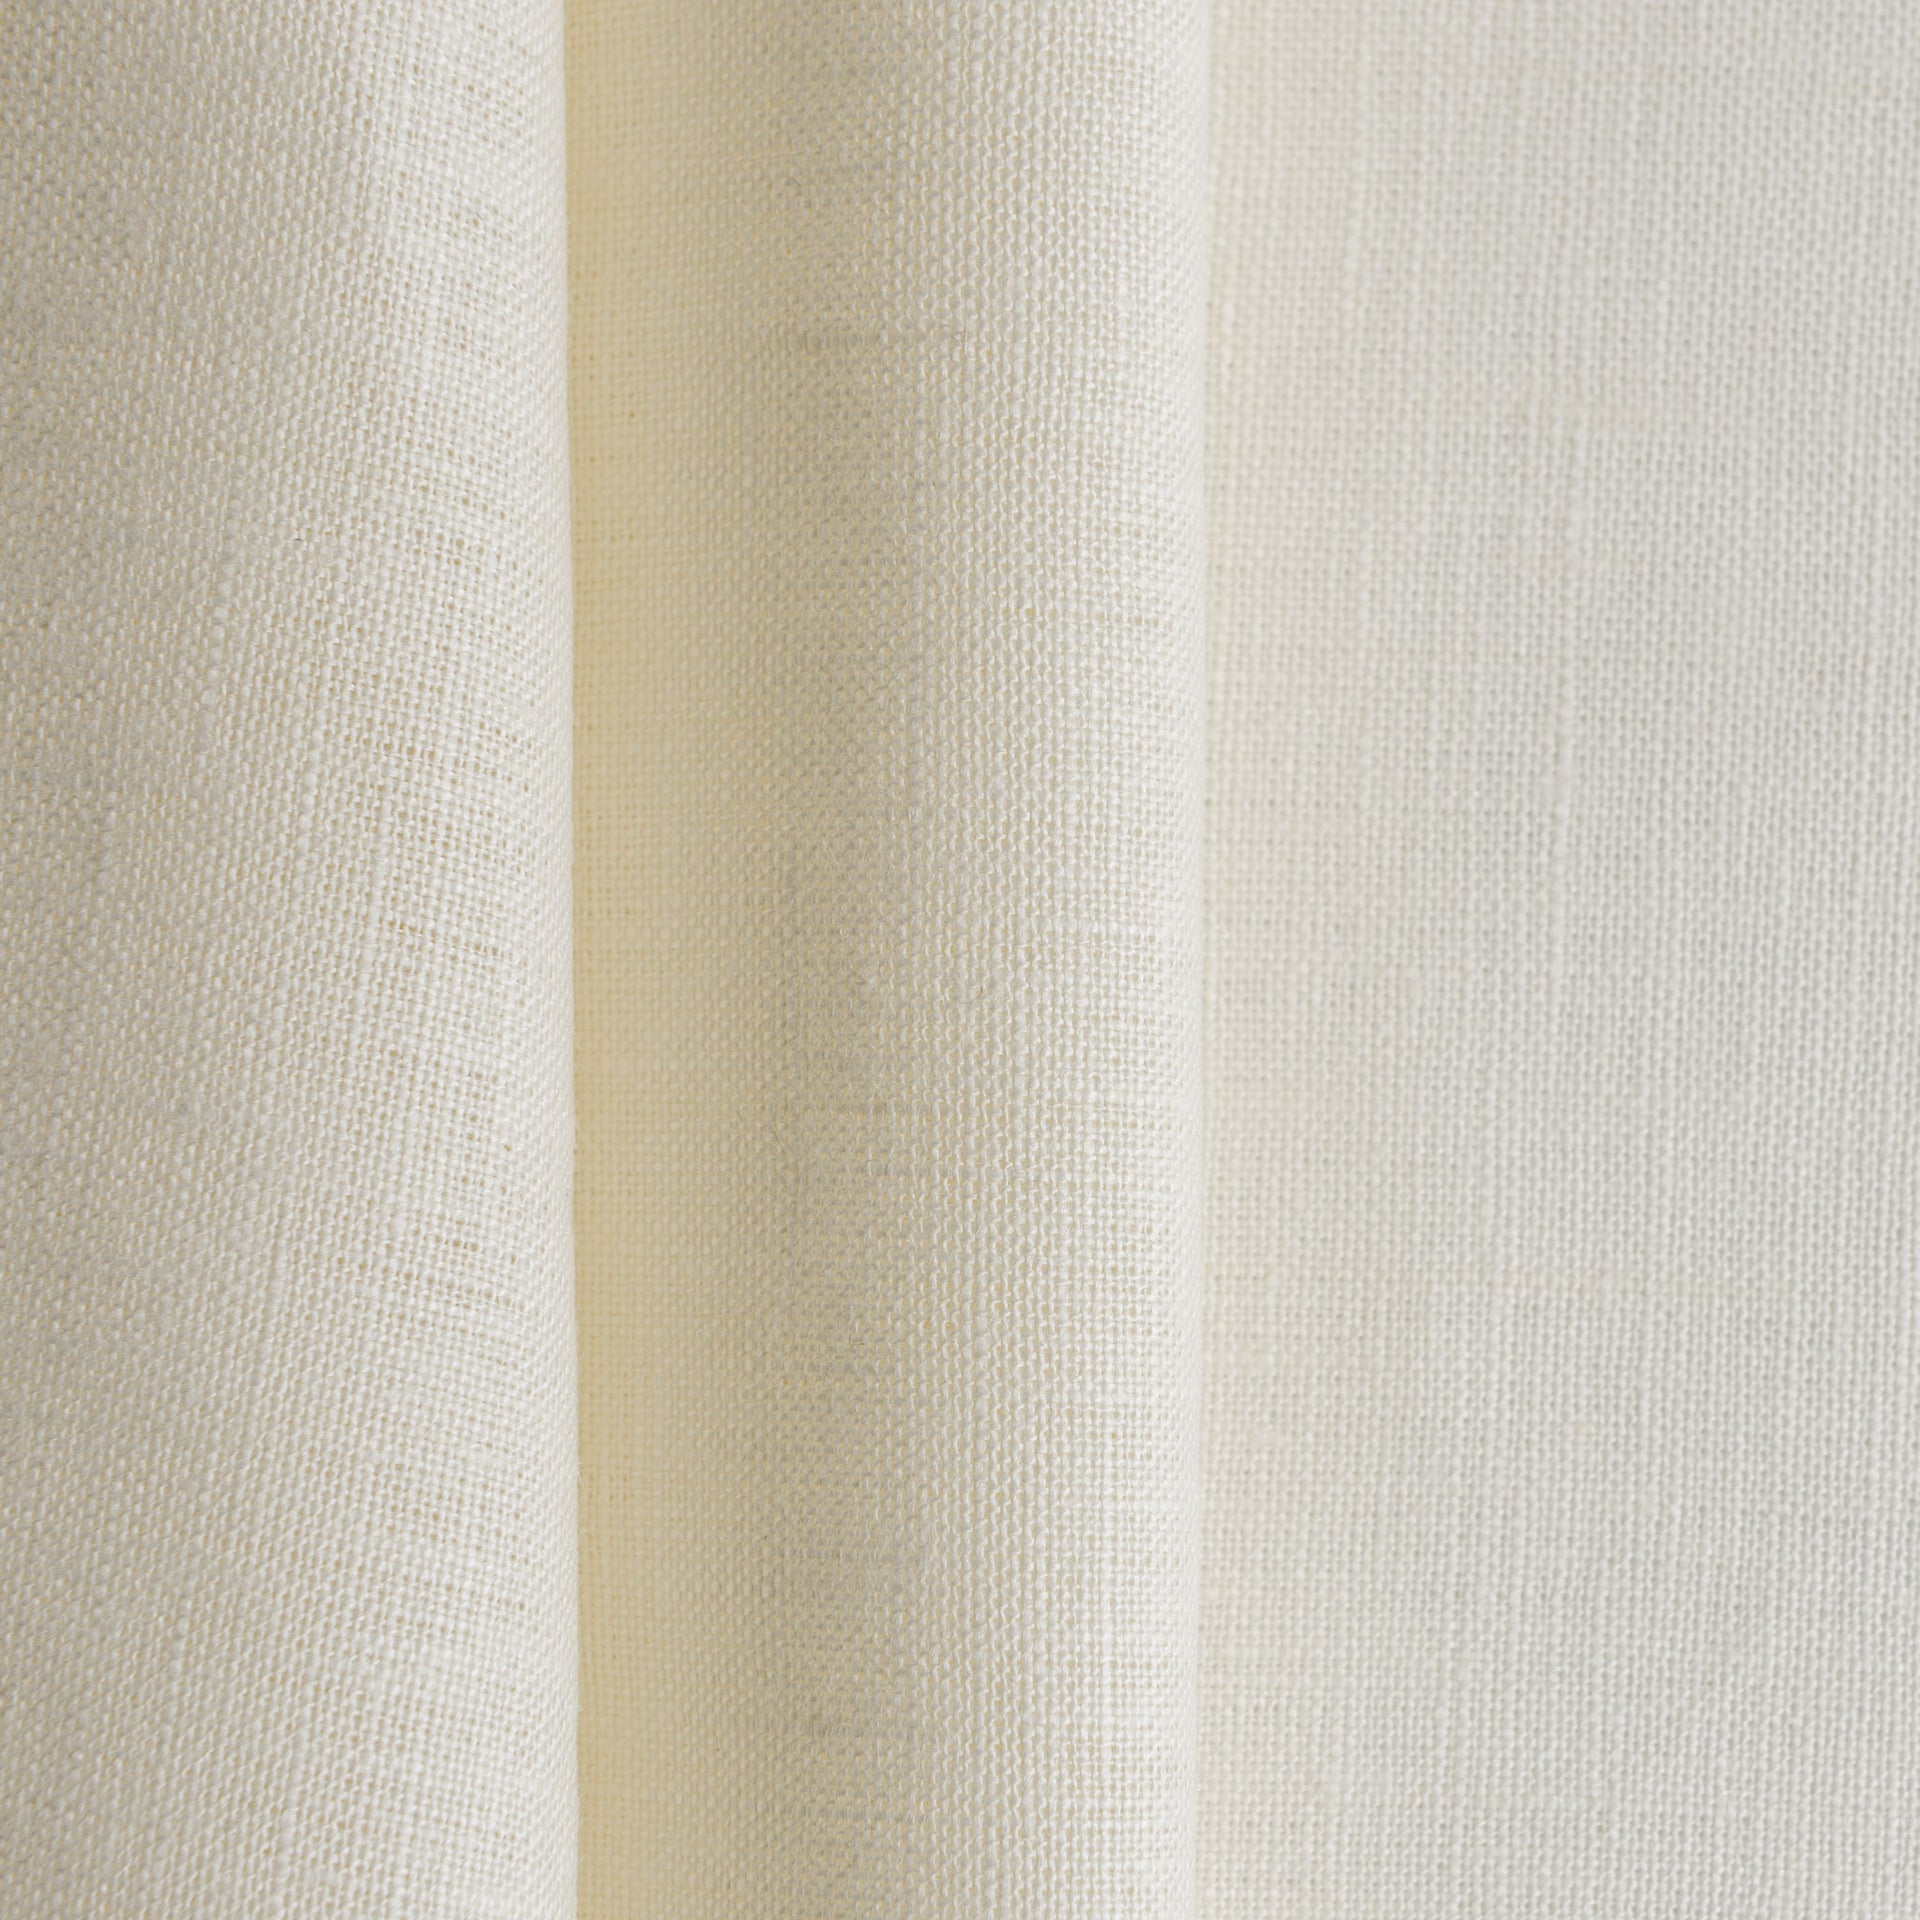 Eyelet Cream Linen Curtain Panel with Blackout Lining - Grommet Curtain, Color: Cream